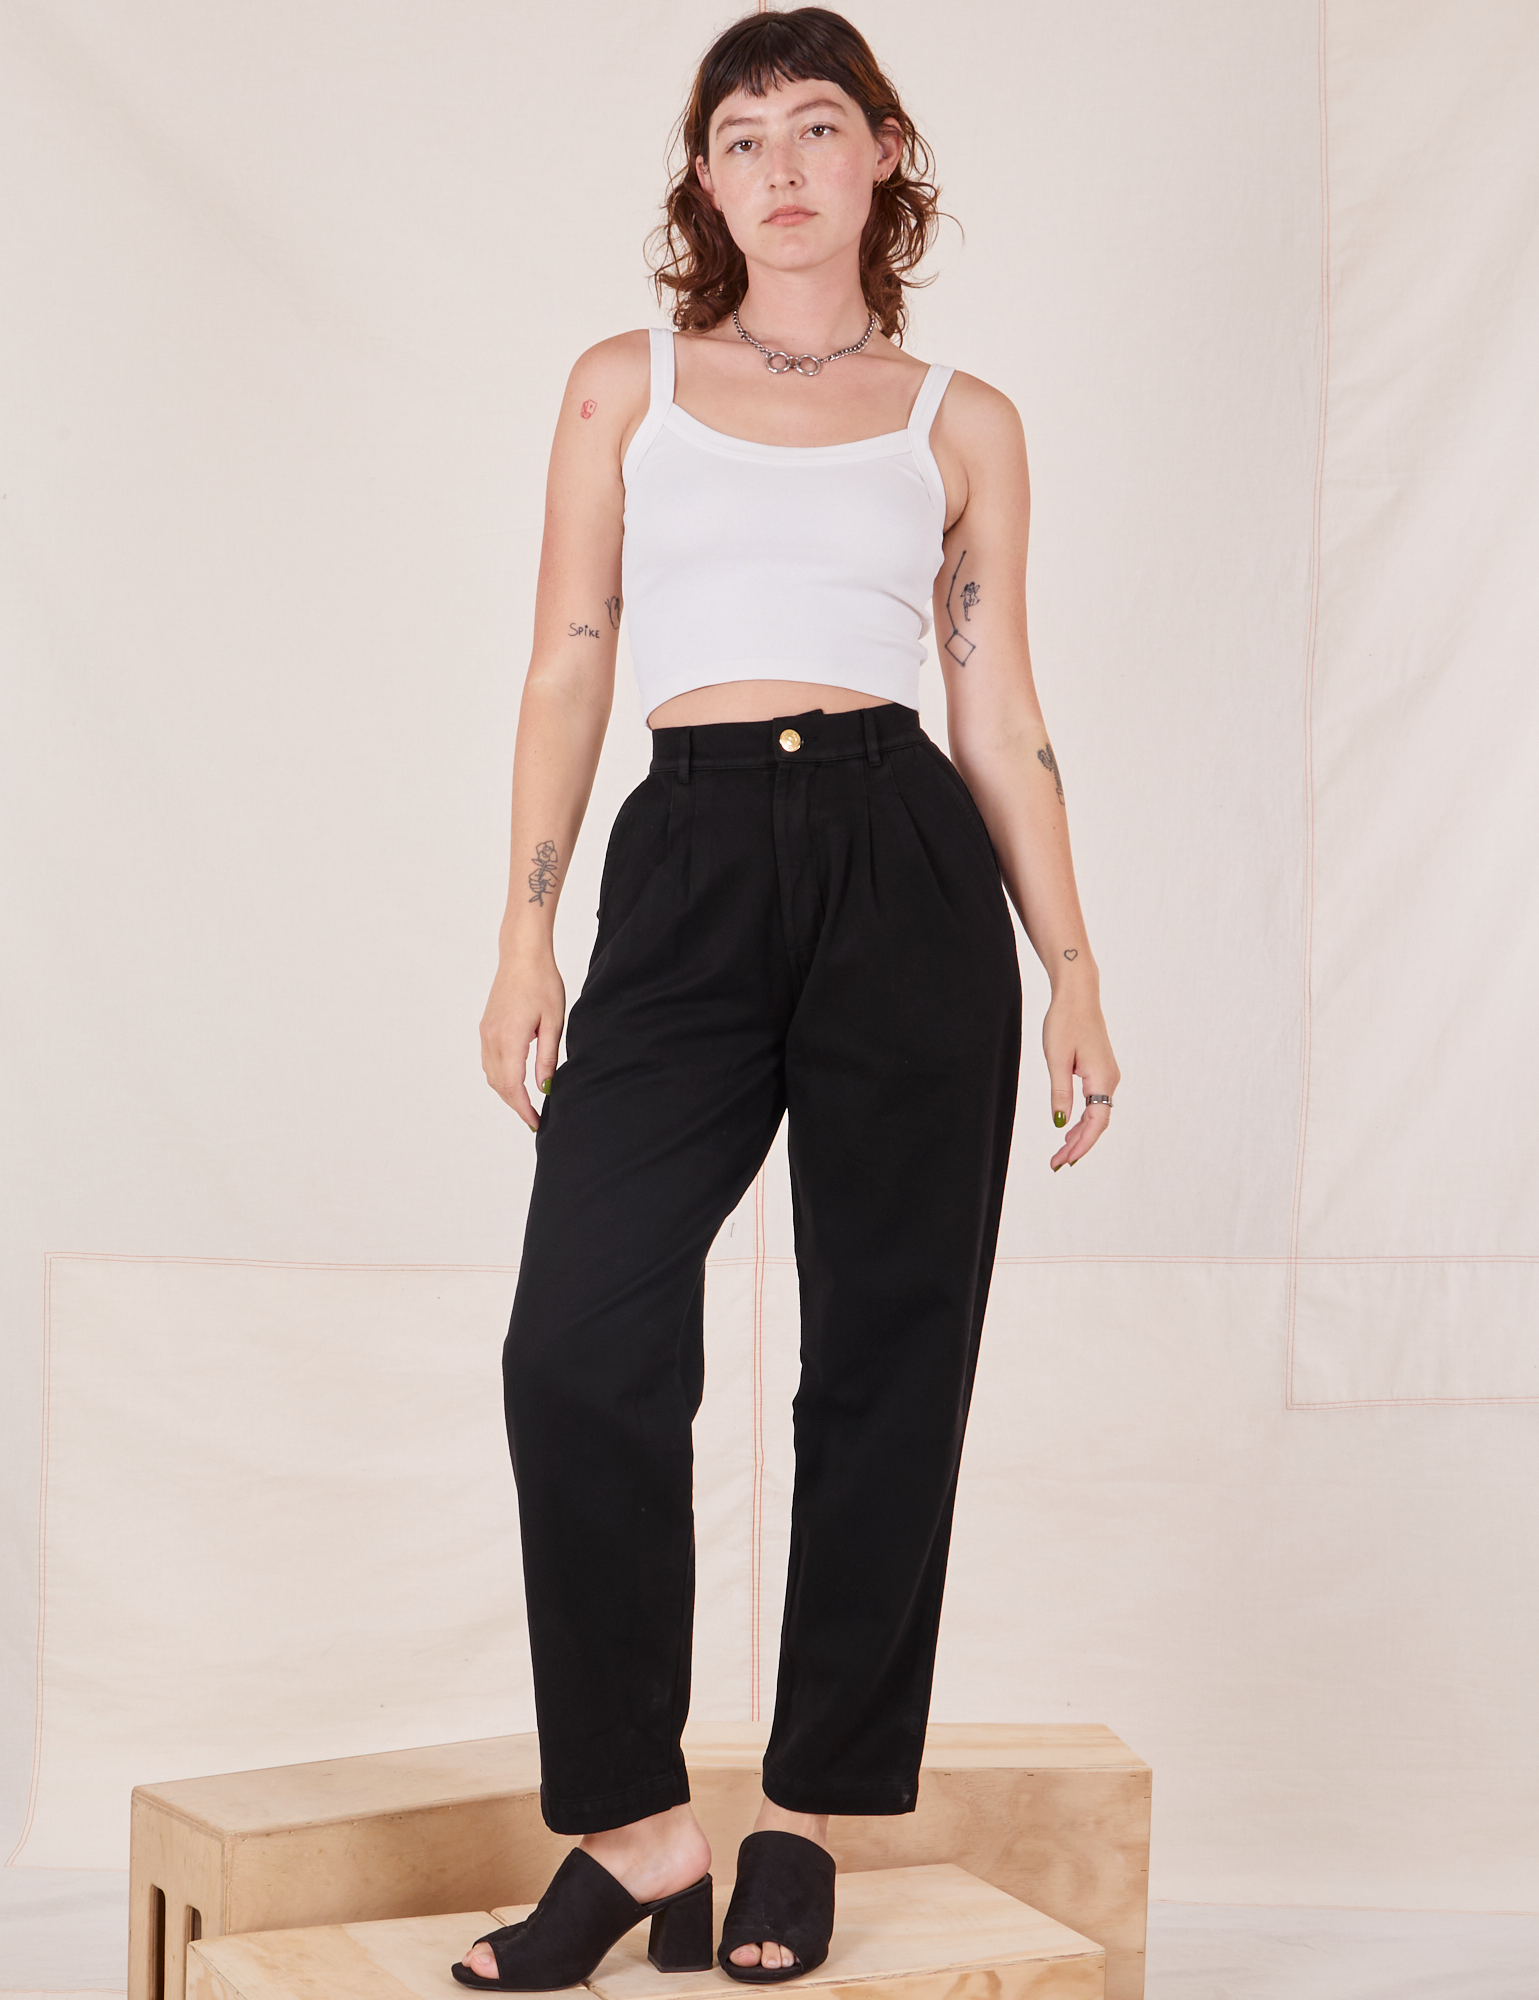 Alex is wearing Organic Trousers in Basic Black and Cropped Cami in vintage tee off-white